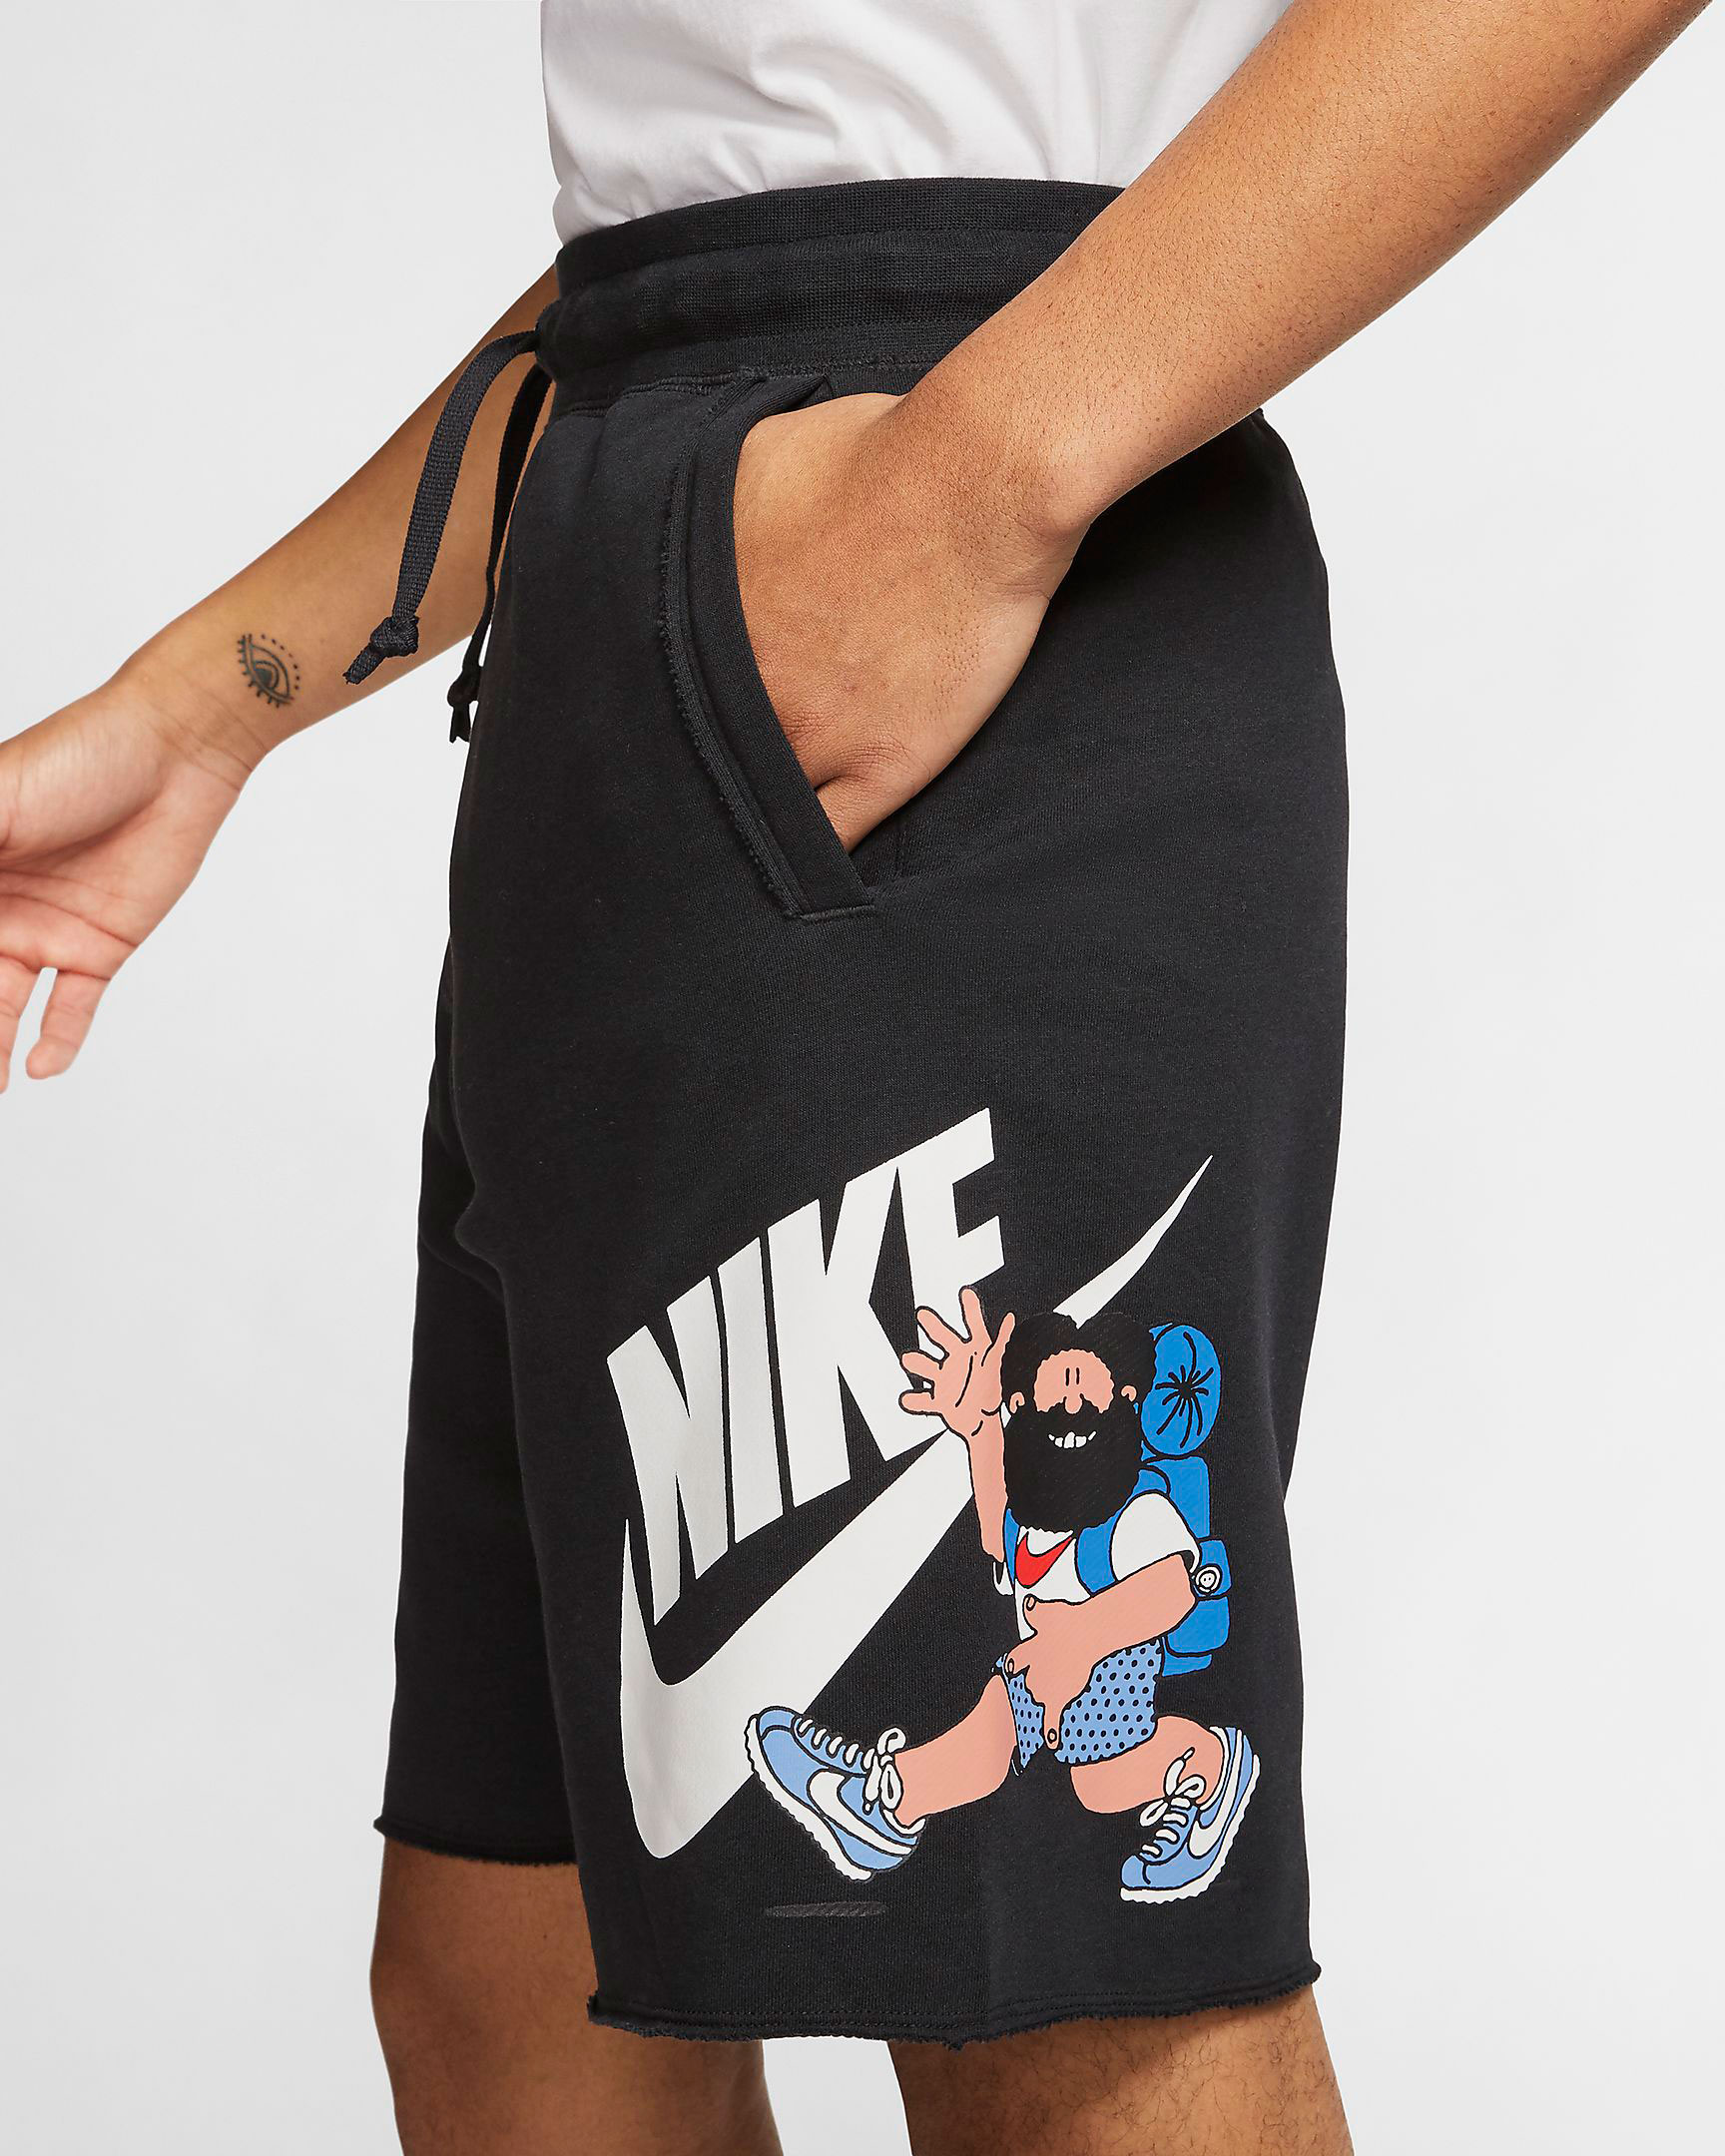 nike shorts with cartoon characters on them